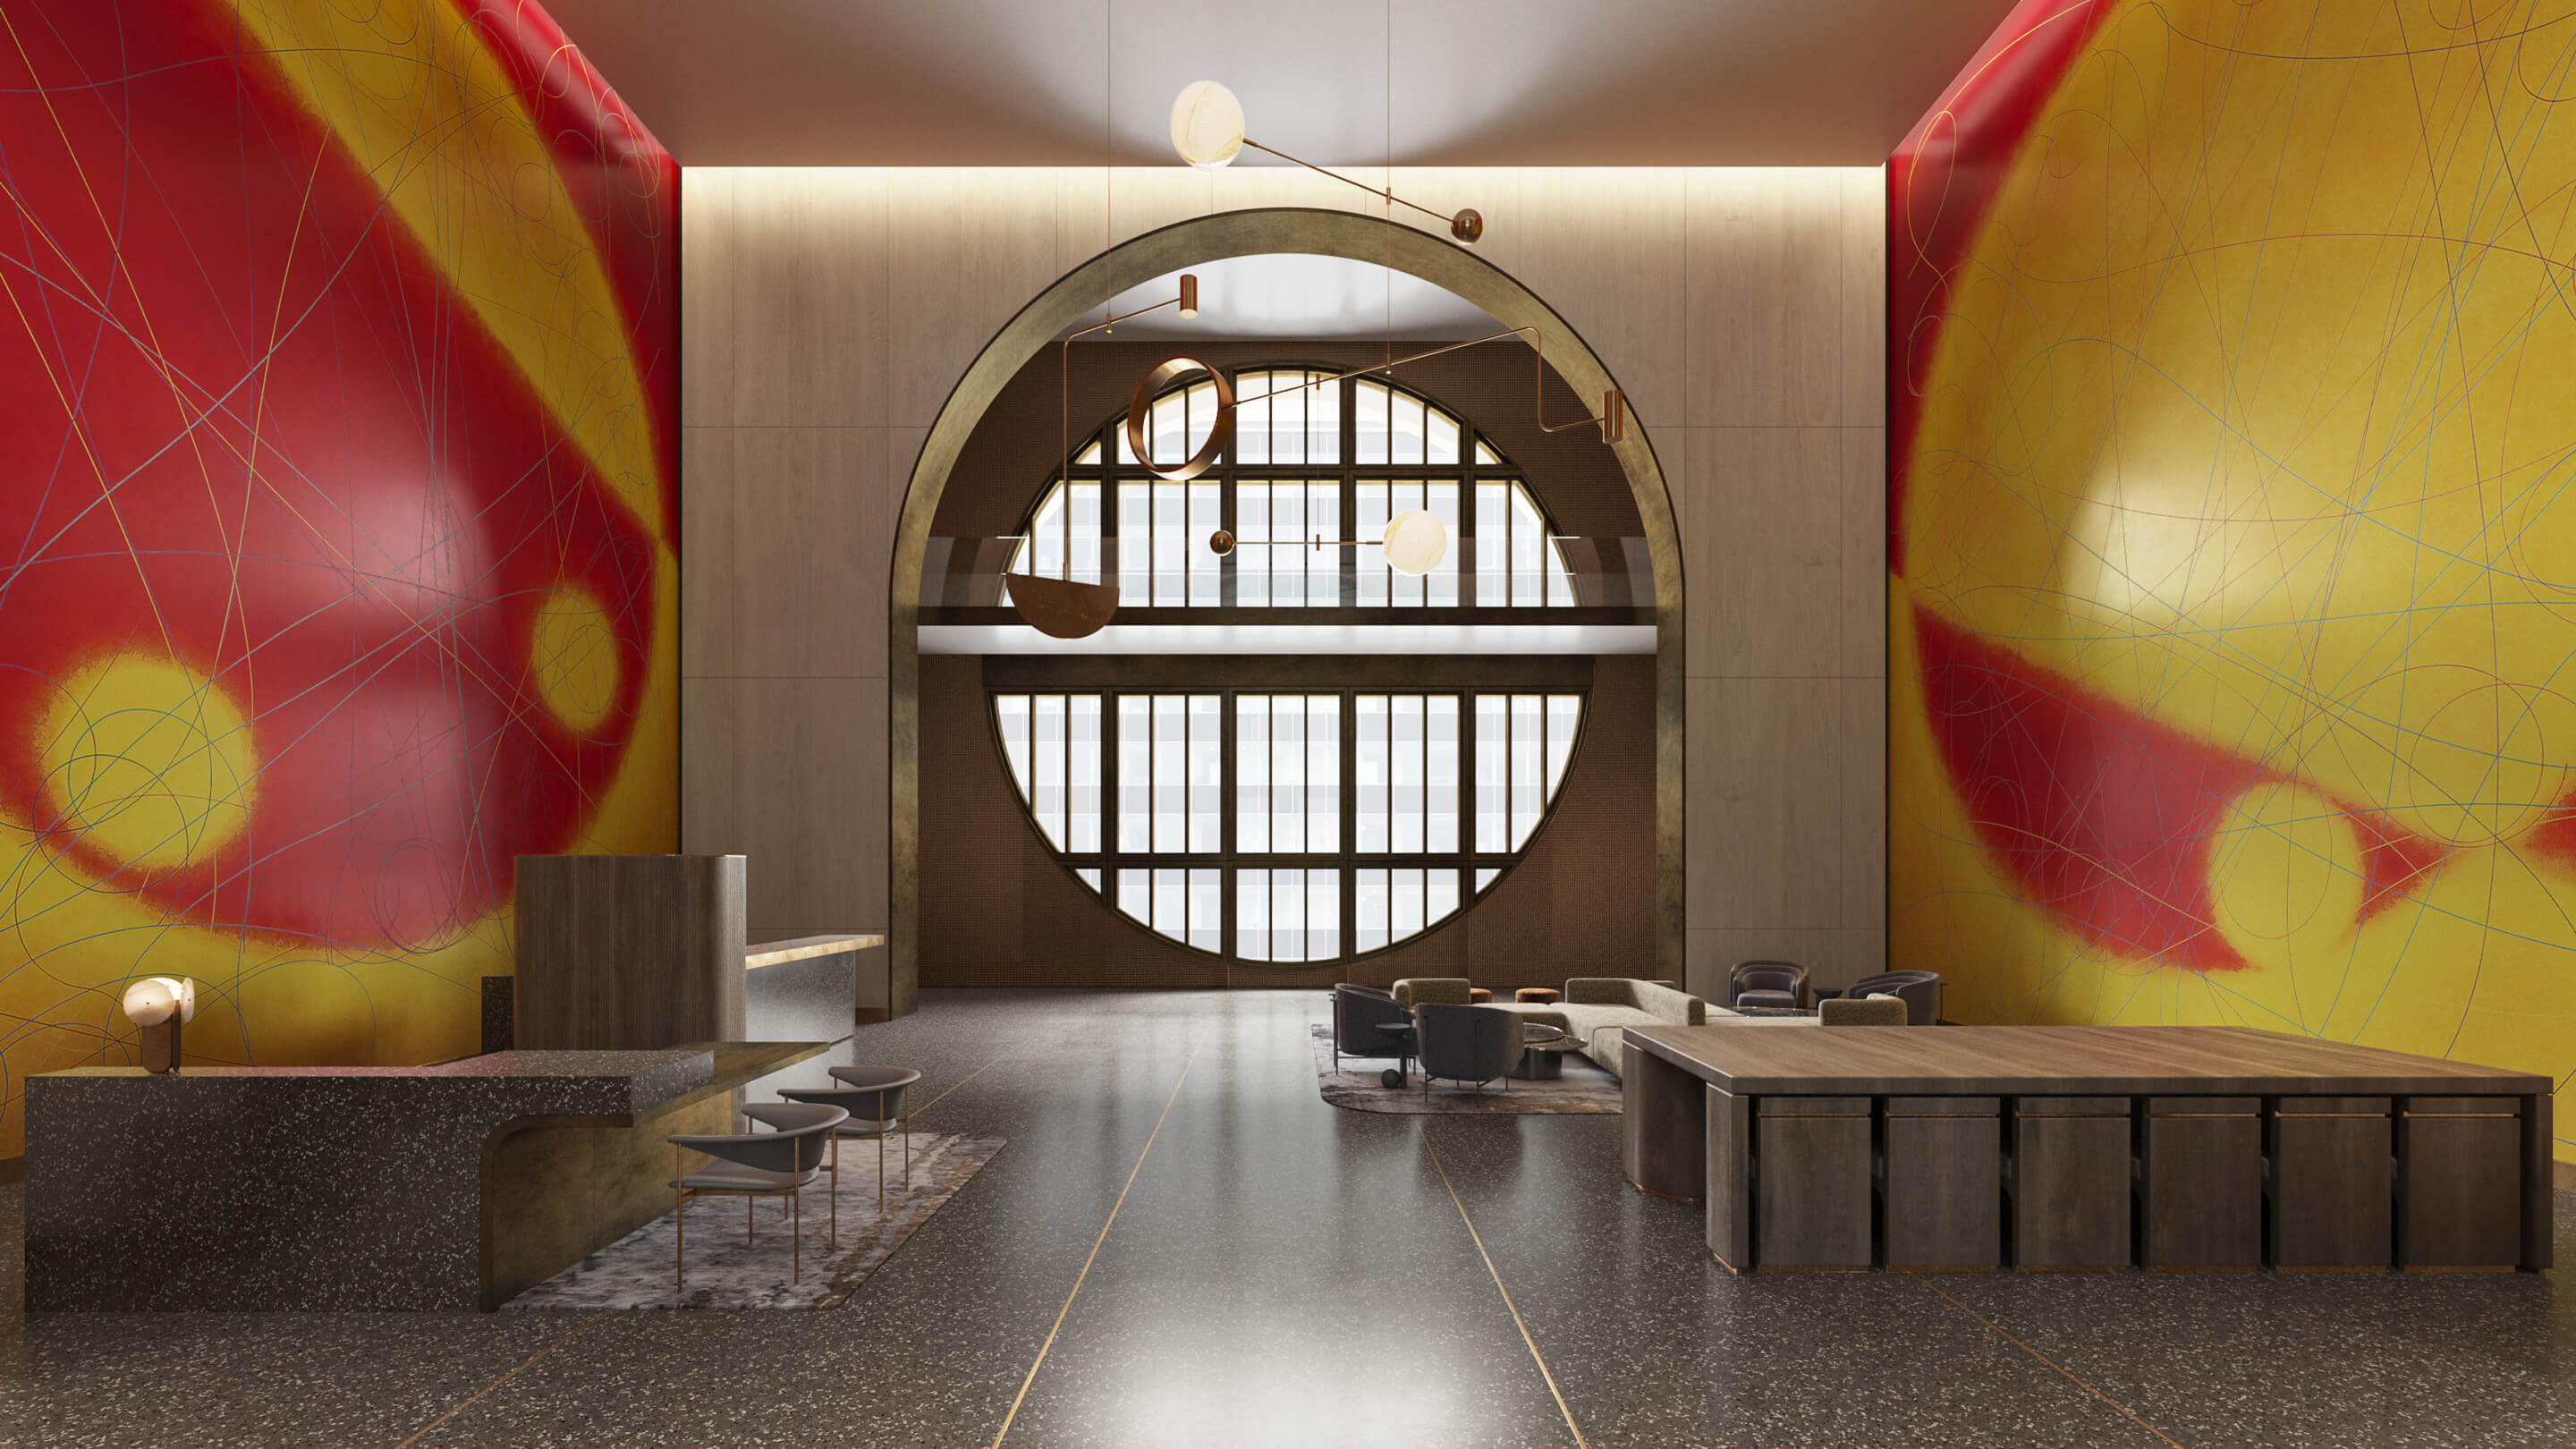 A rendering of two murals facing a big round window